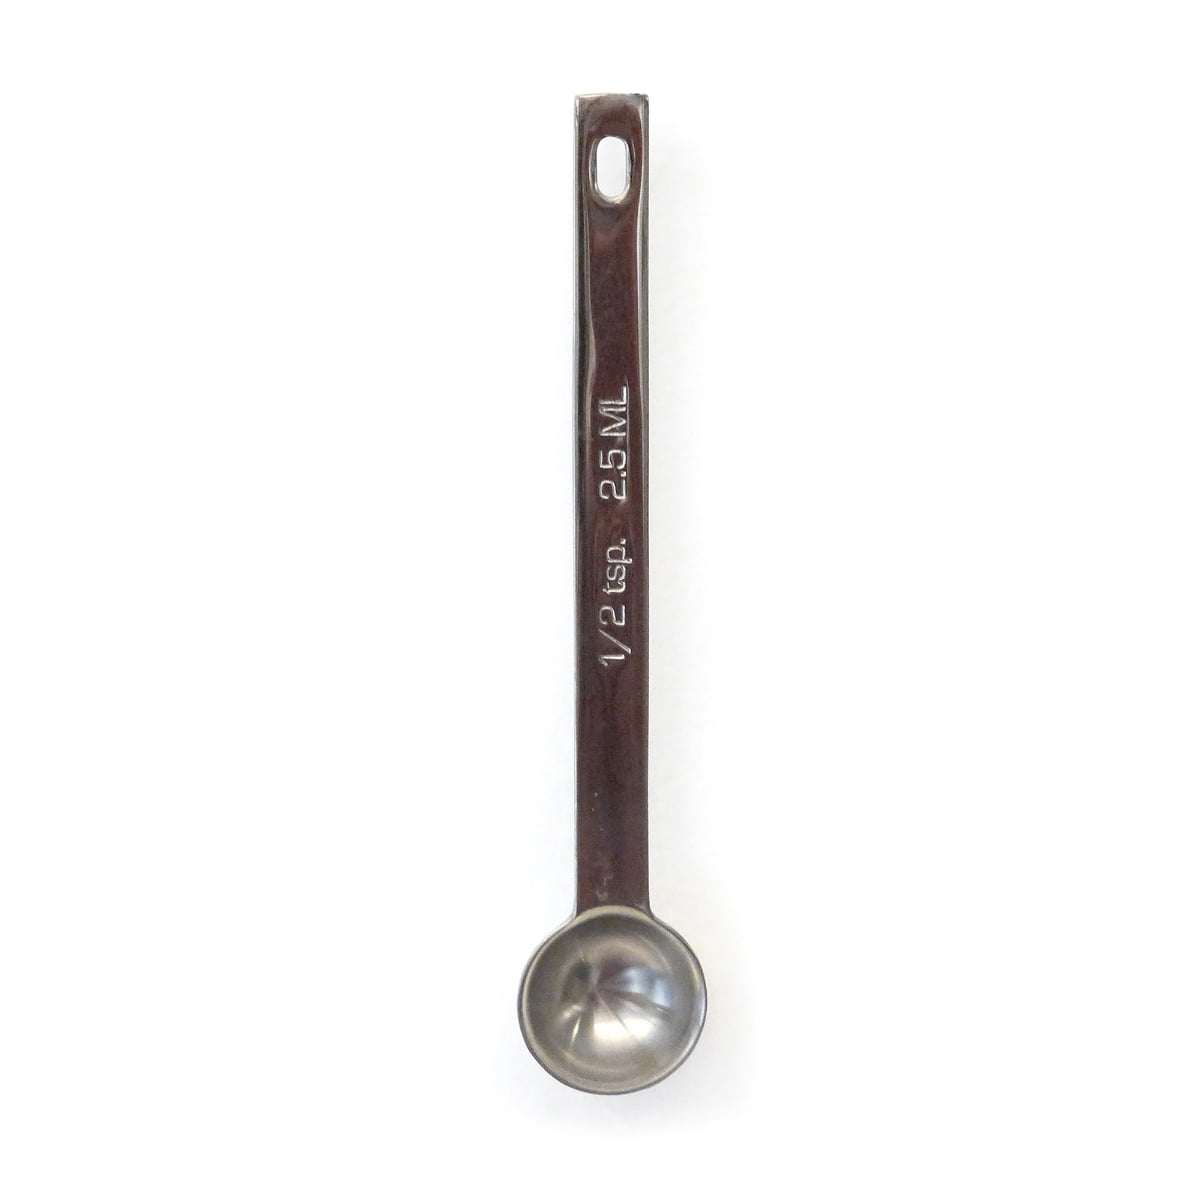 There's a chance your measuring spoons aren't accurate